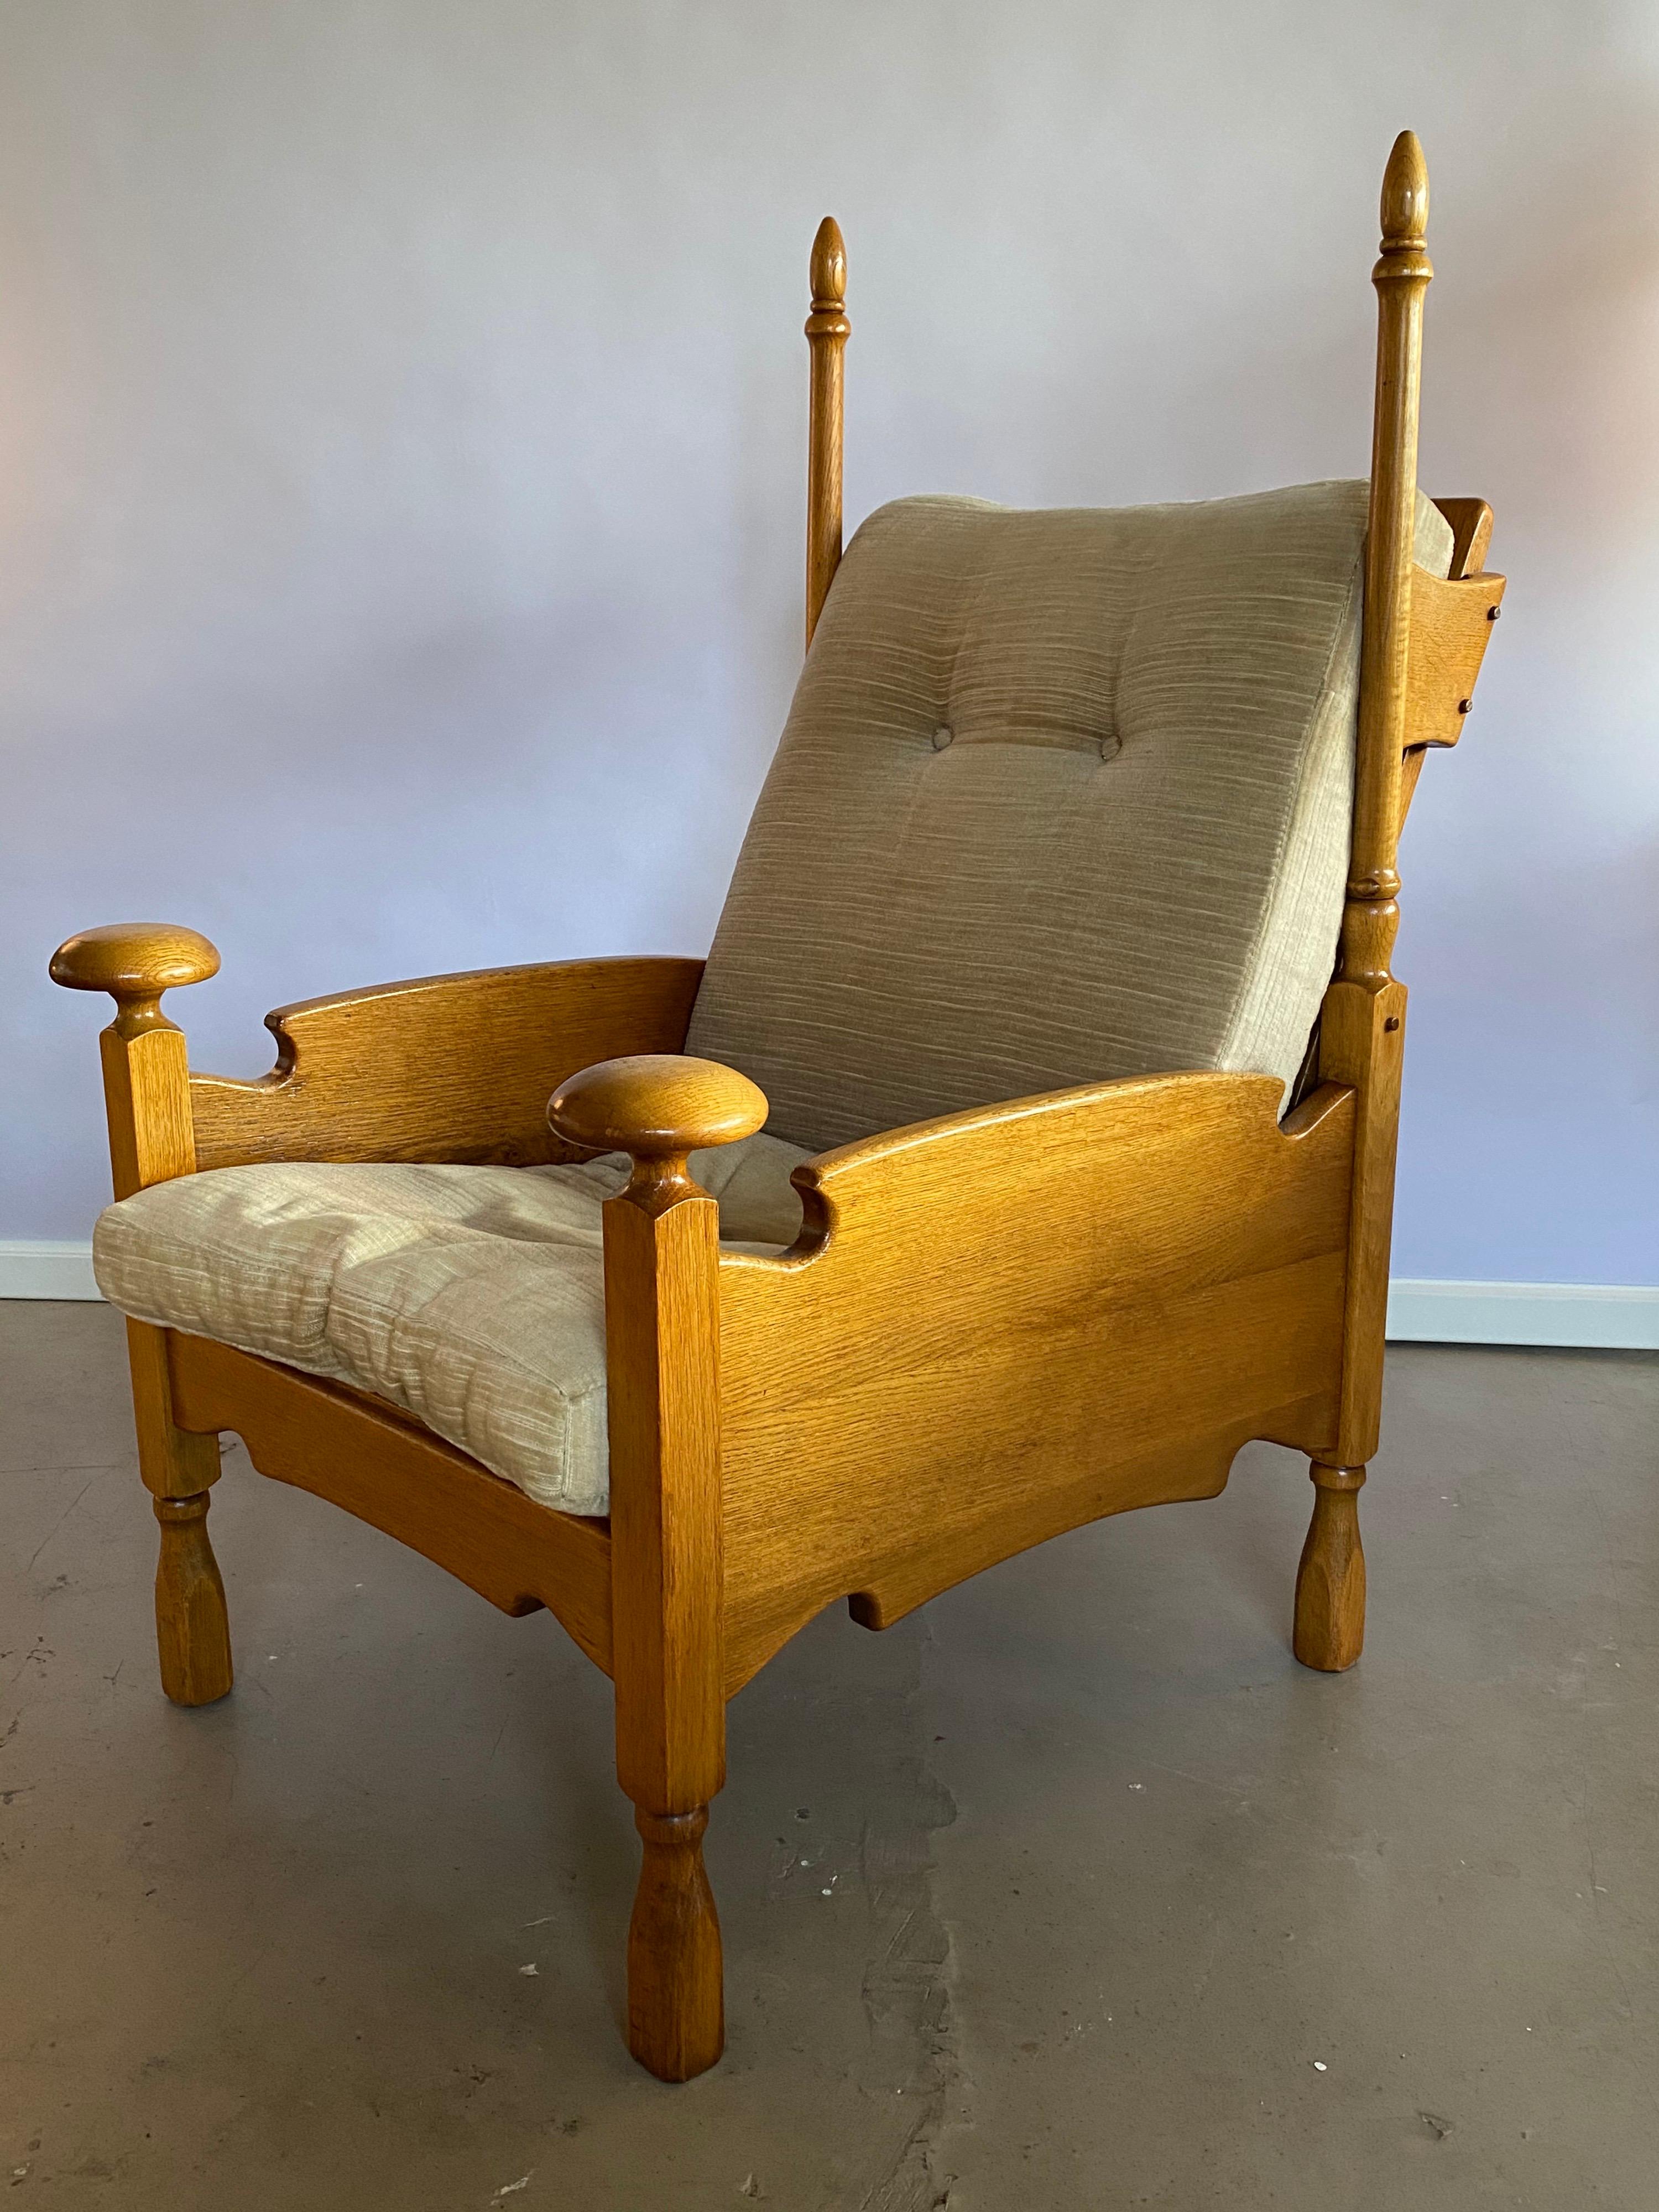 Rare and very unusually shaped light oak lounge chairs - castle model chairs with the arm knobs and the high horn-shaped rods at the back. They have a silvery beige/green velvet-like upholstery (with zippers, so very easy to reupholster) and are